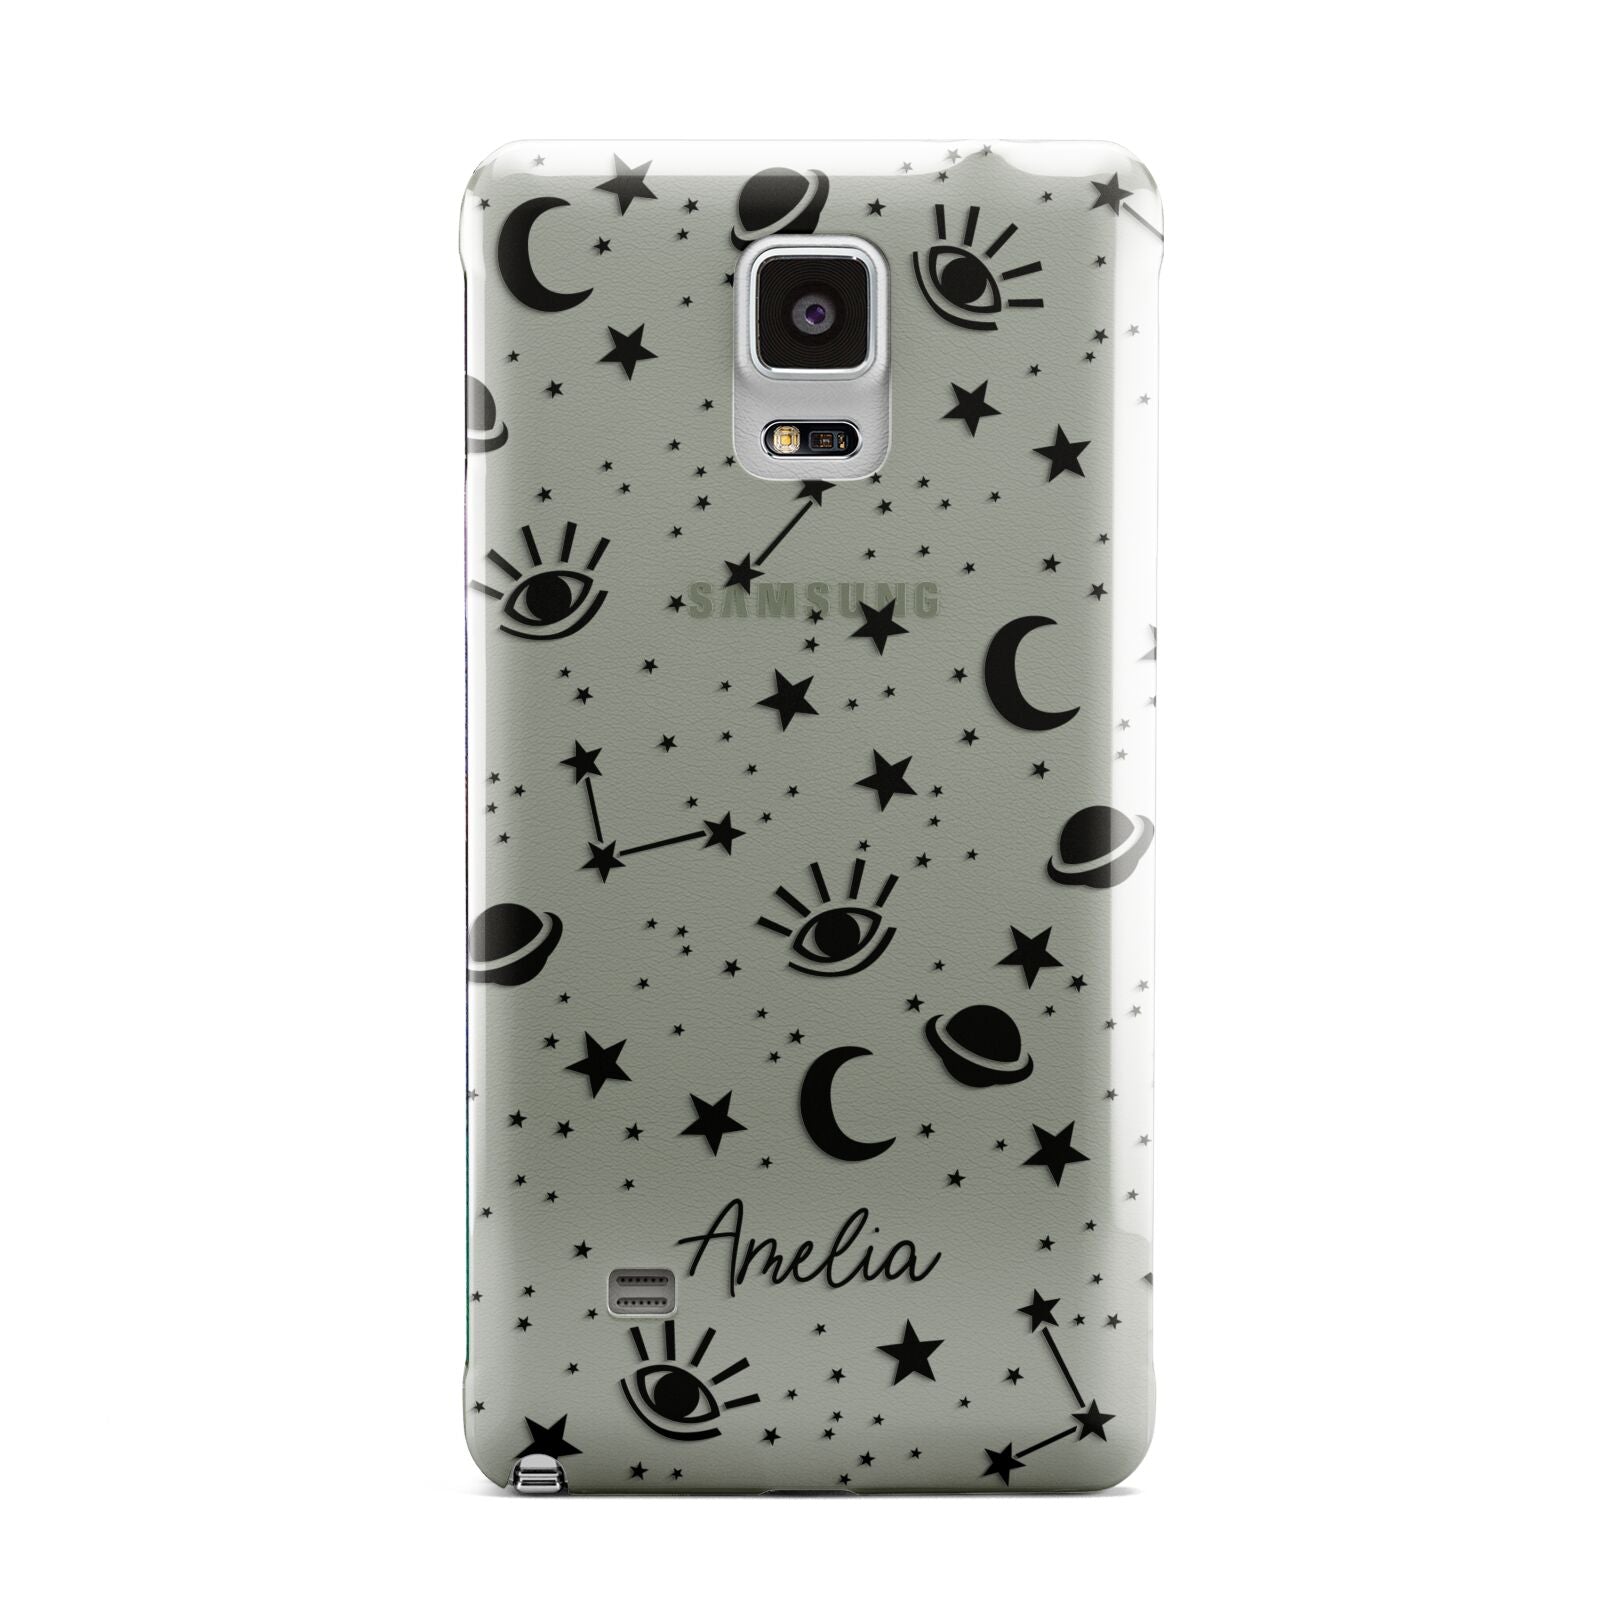 Monochrome Zodiac Constellations with Name Samsung Galaxy Note 4 Case